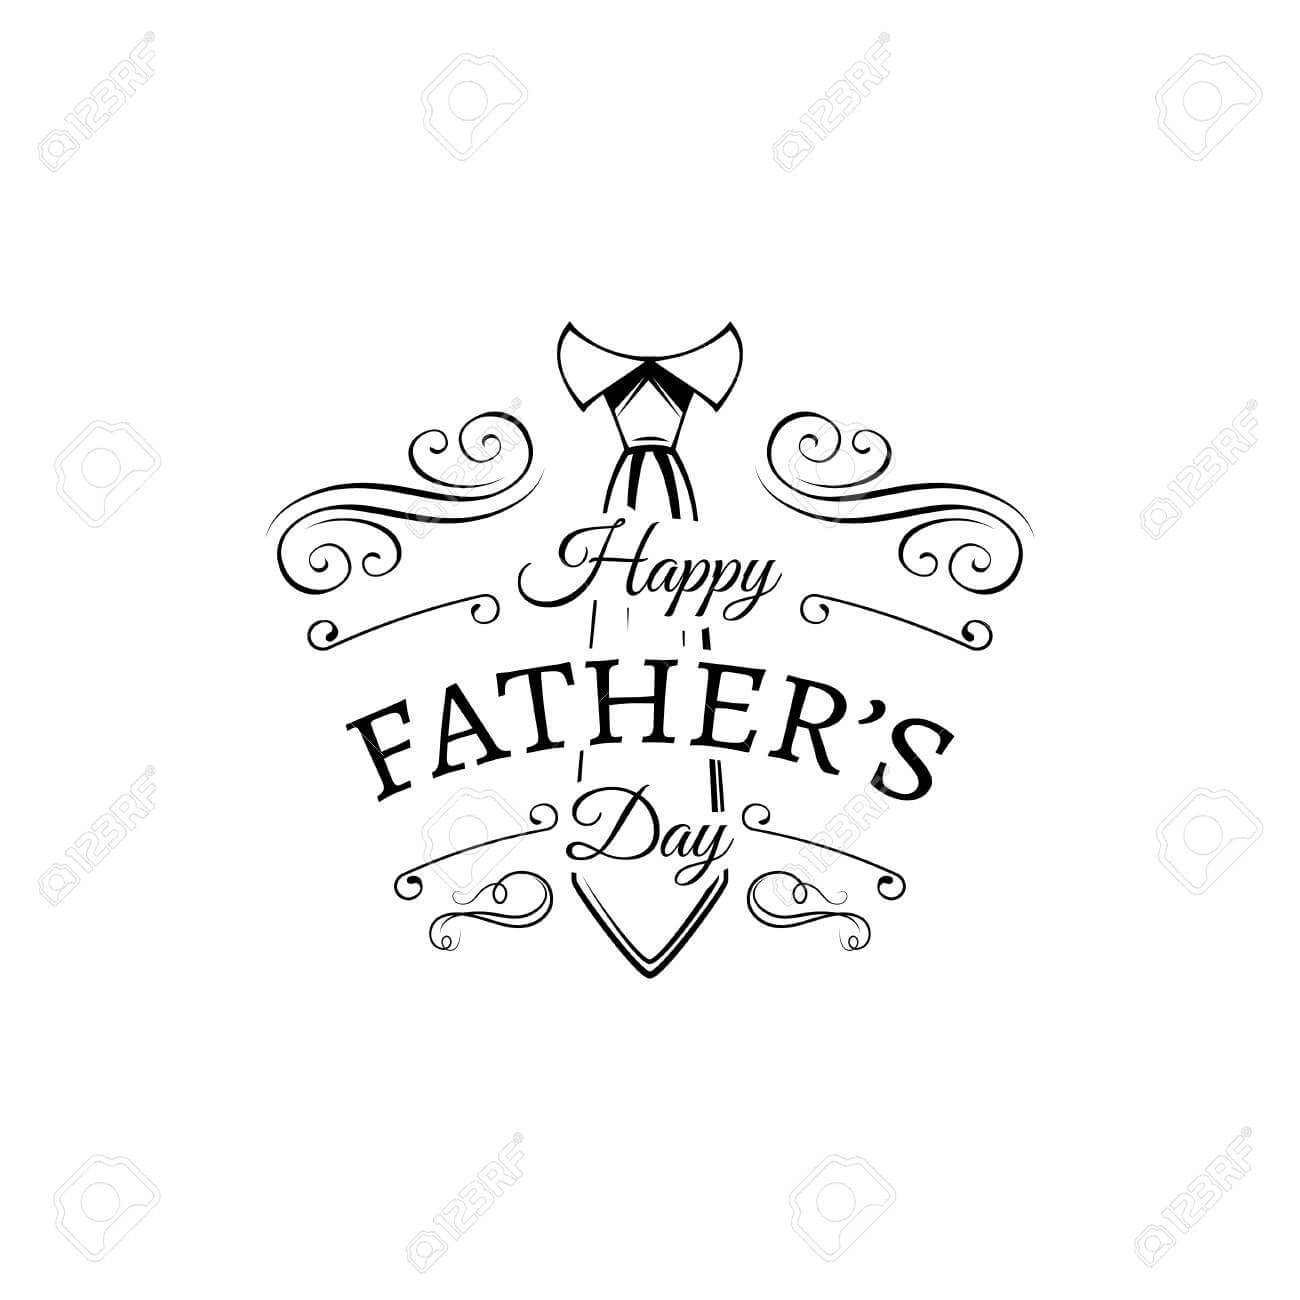 Happy Fathers Day Card Design With Necktie Vector Illustration For Fathers Day Card Template